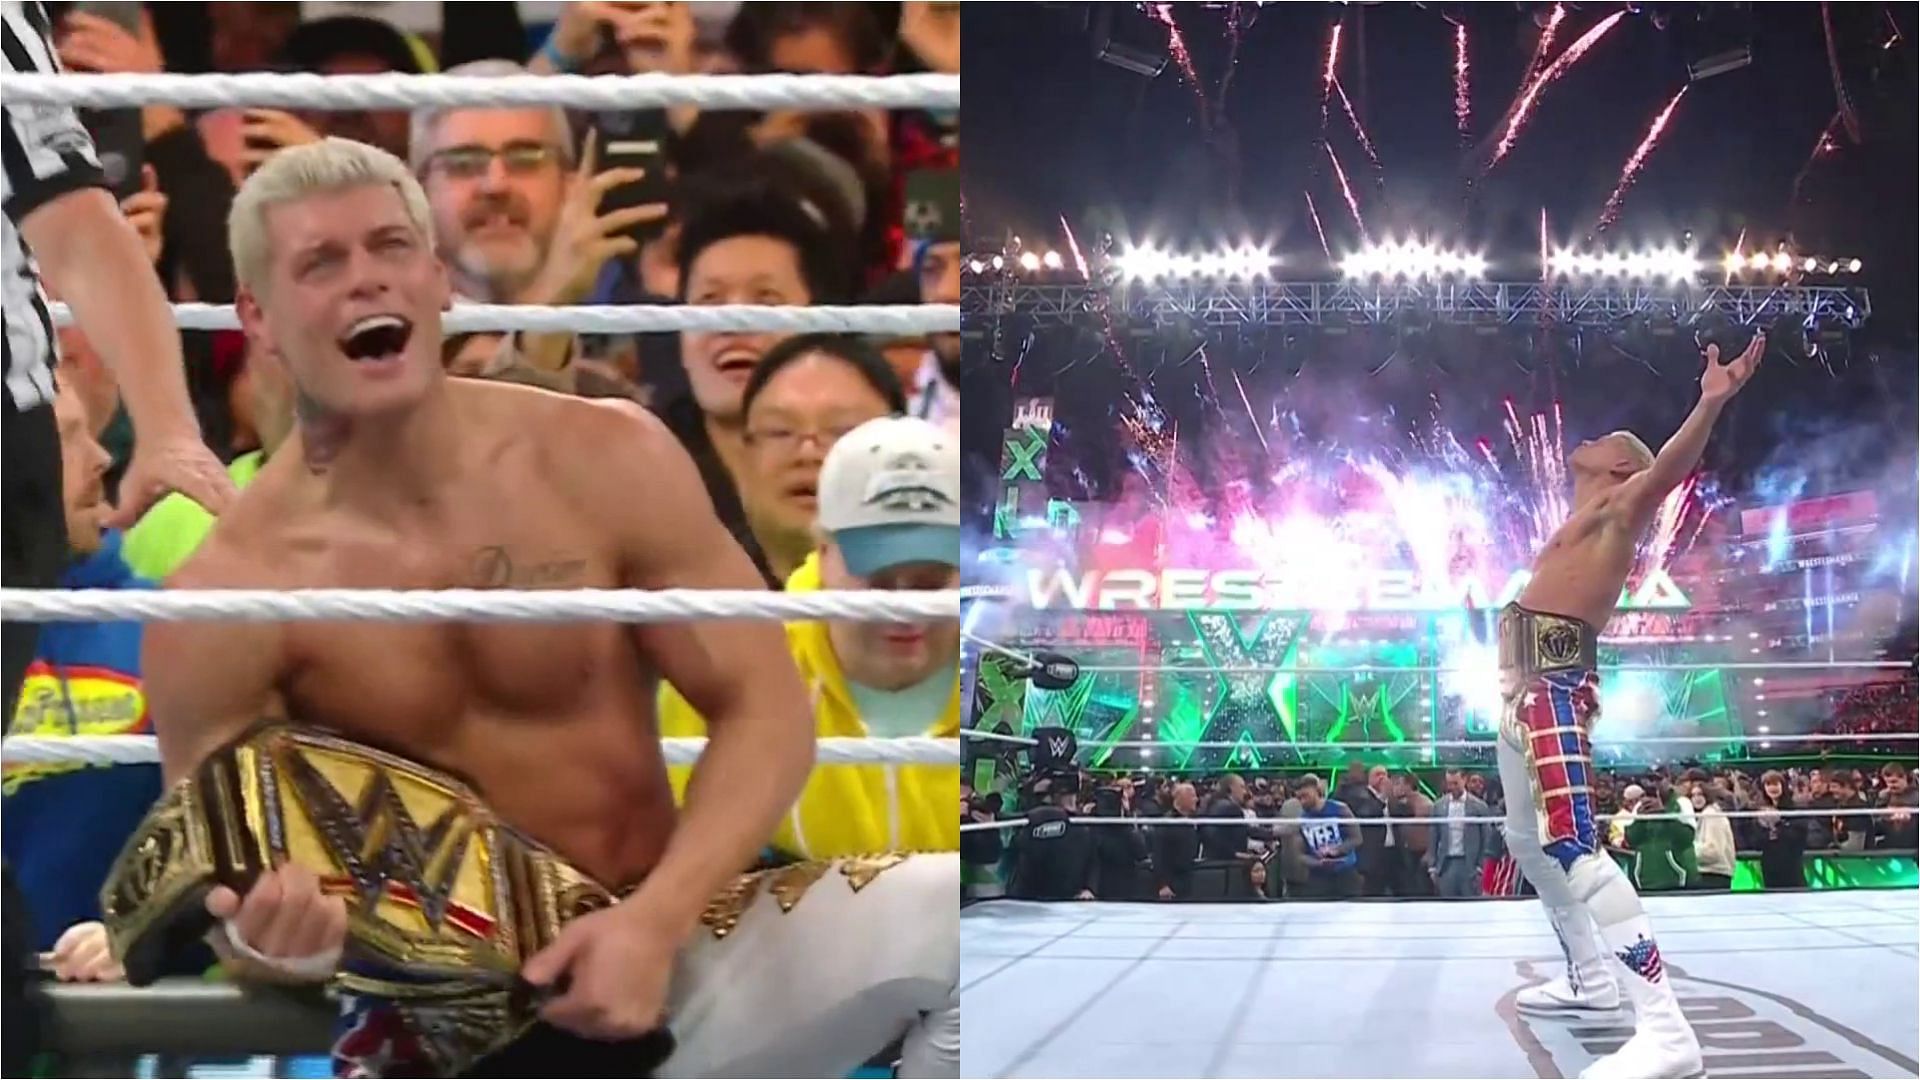 The American Nightmare finally finished his story at WrestleMania XL [Images courtesy of WWE